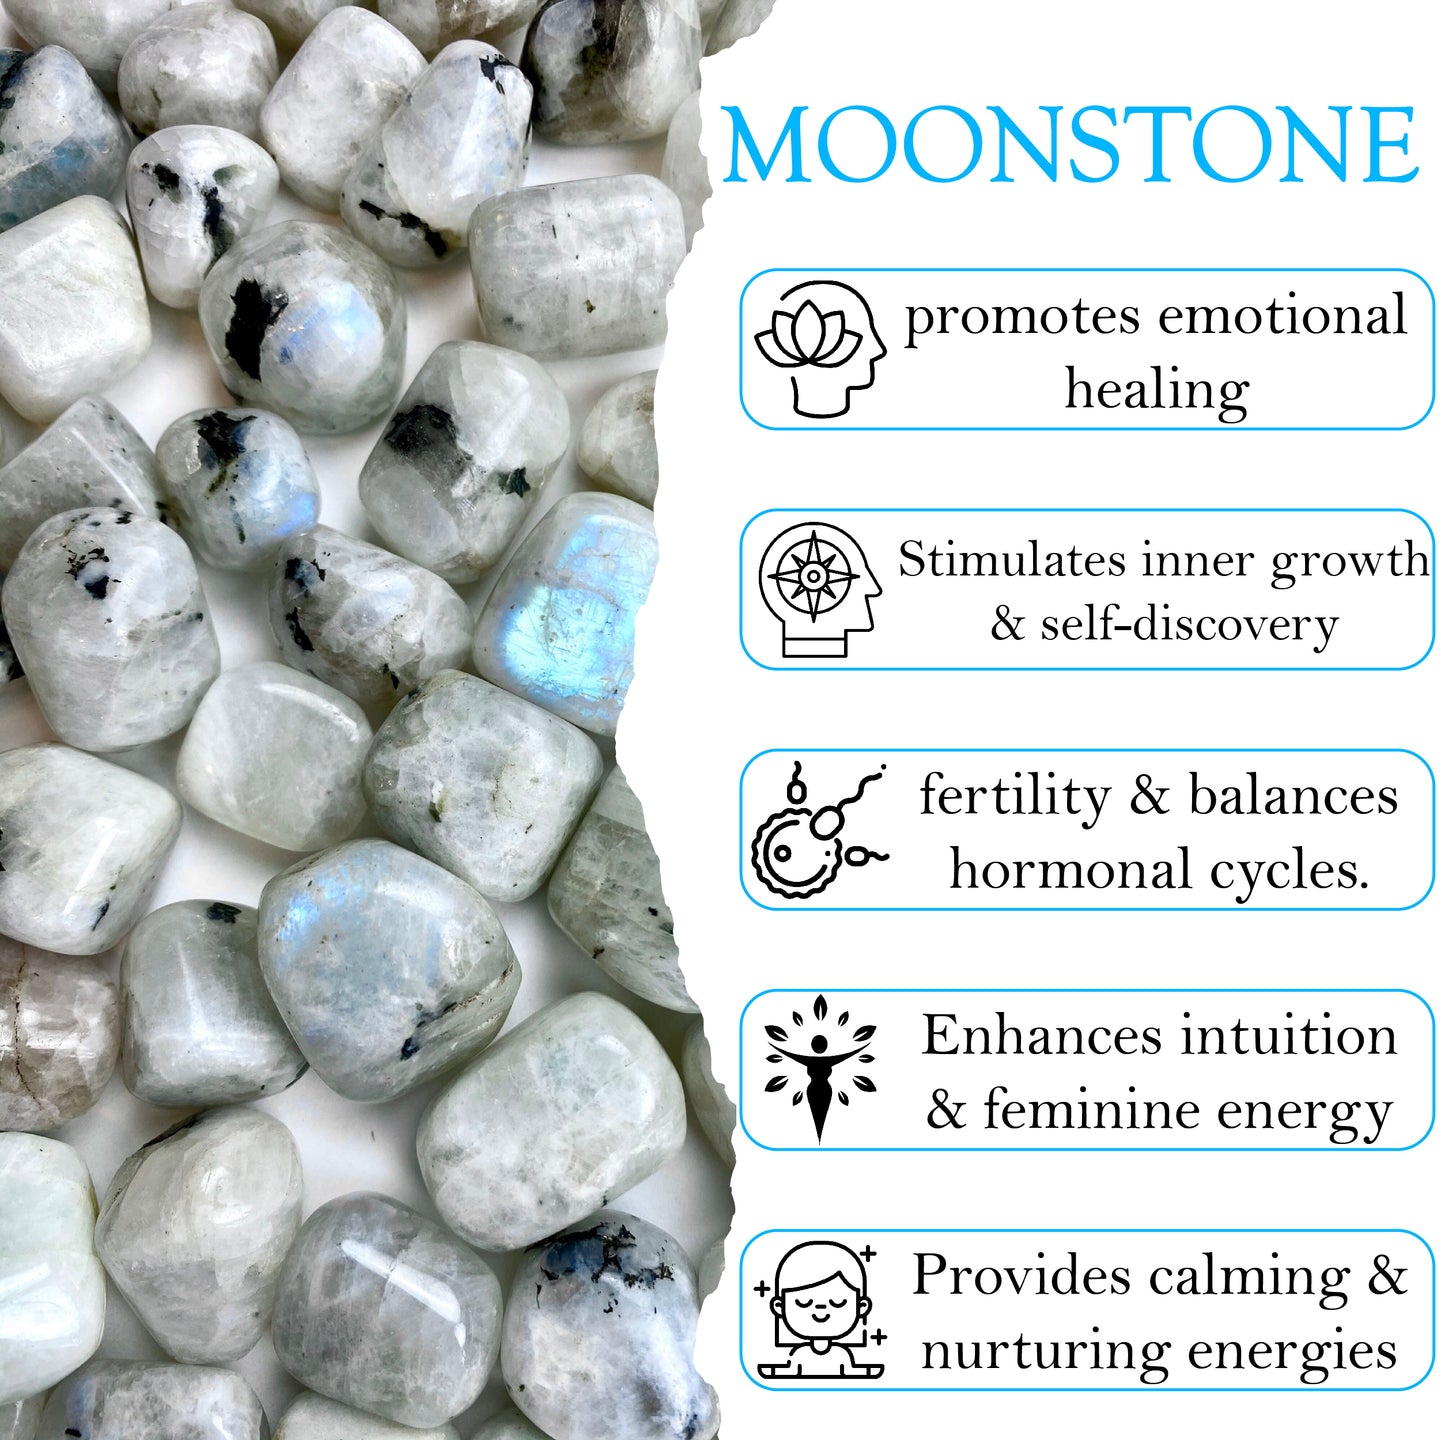 Rainbow Moonstone Crystal Pendant Necklace for Emotional Healing and Balance - Handmade & Ethically Sourced Raw Stone Necklace for Intuition and Inspiration Best Mother's Day Gift for her